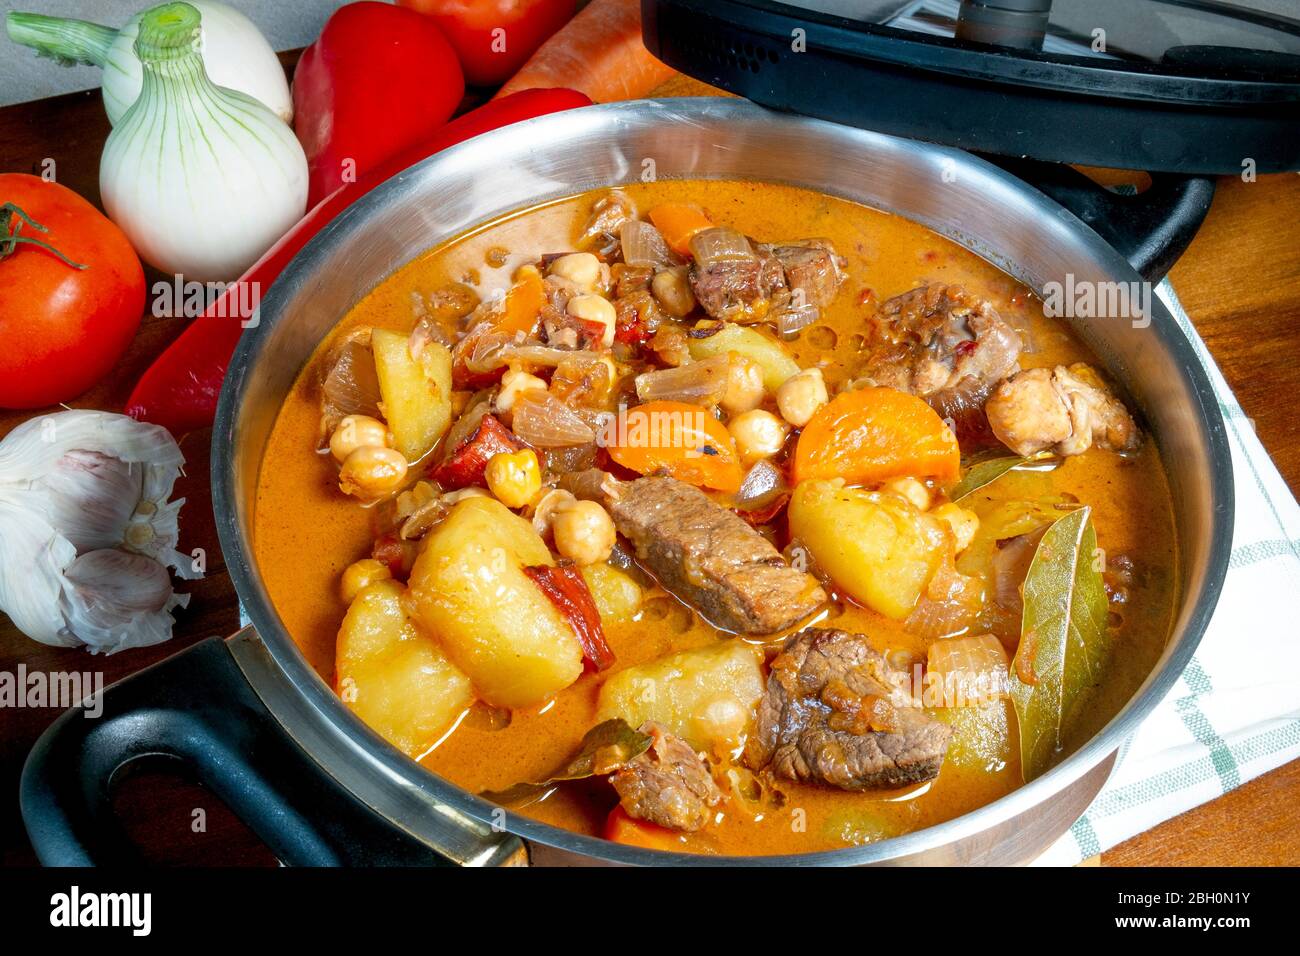 Beef stew in a large pot with vegetables and a wood table, seen from directly above ,part of a series Stock Photo